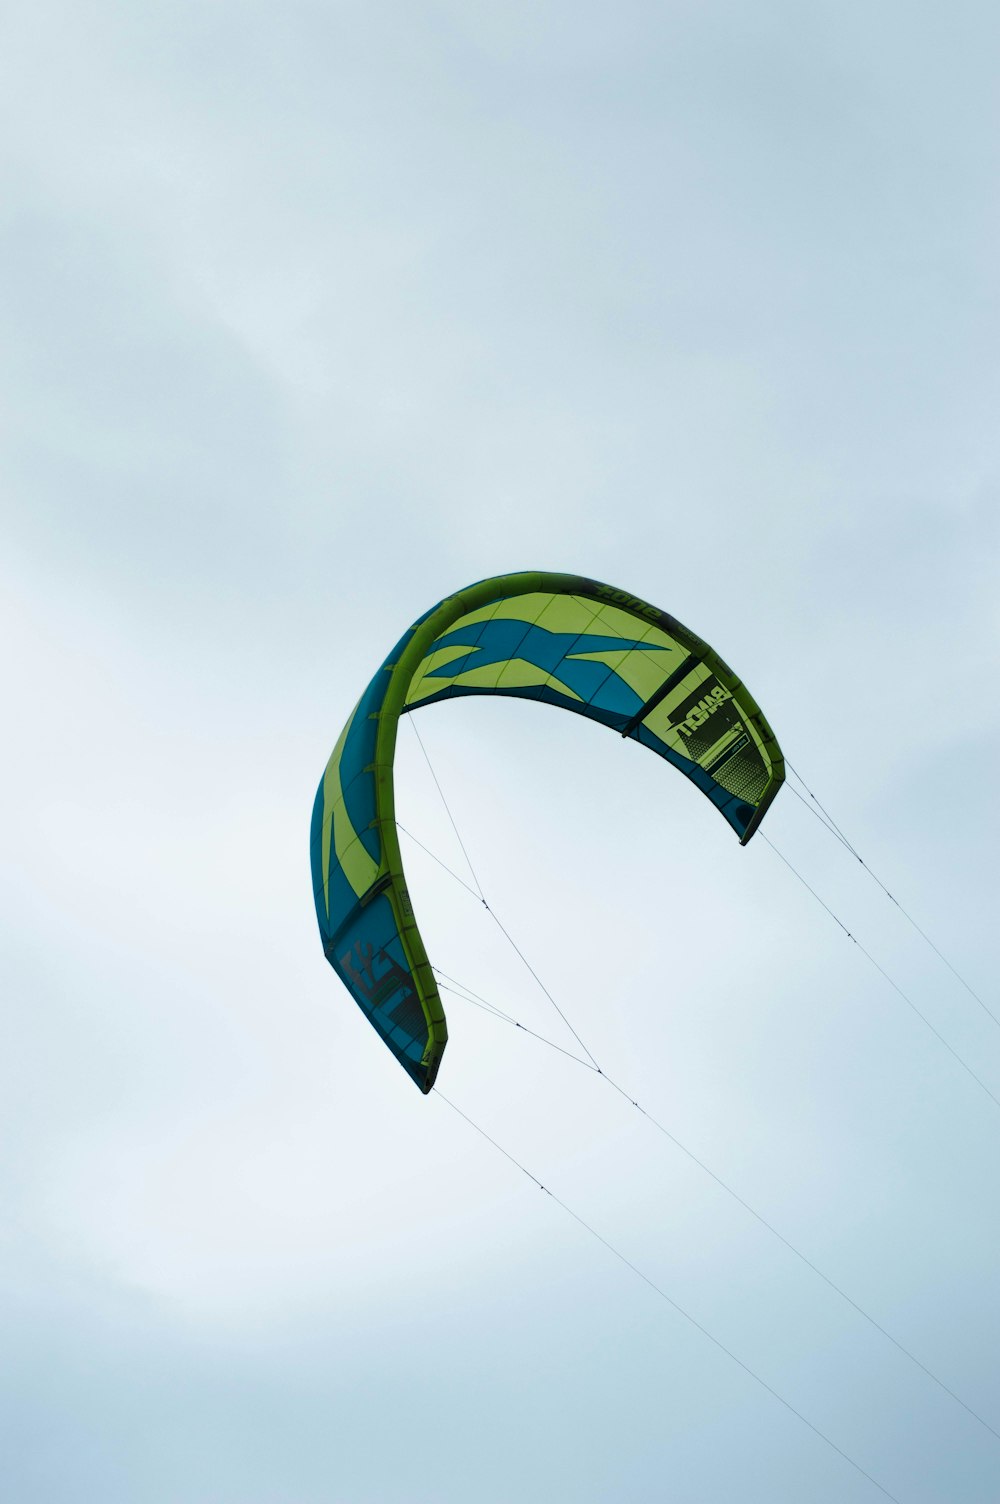 blue green and yellow parachute